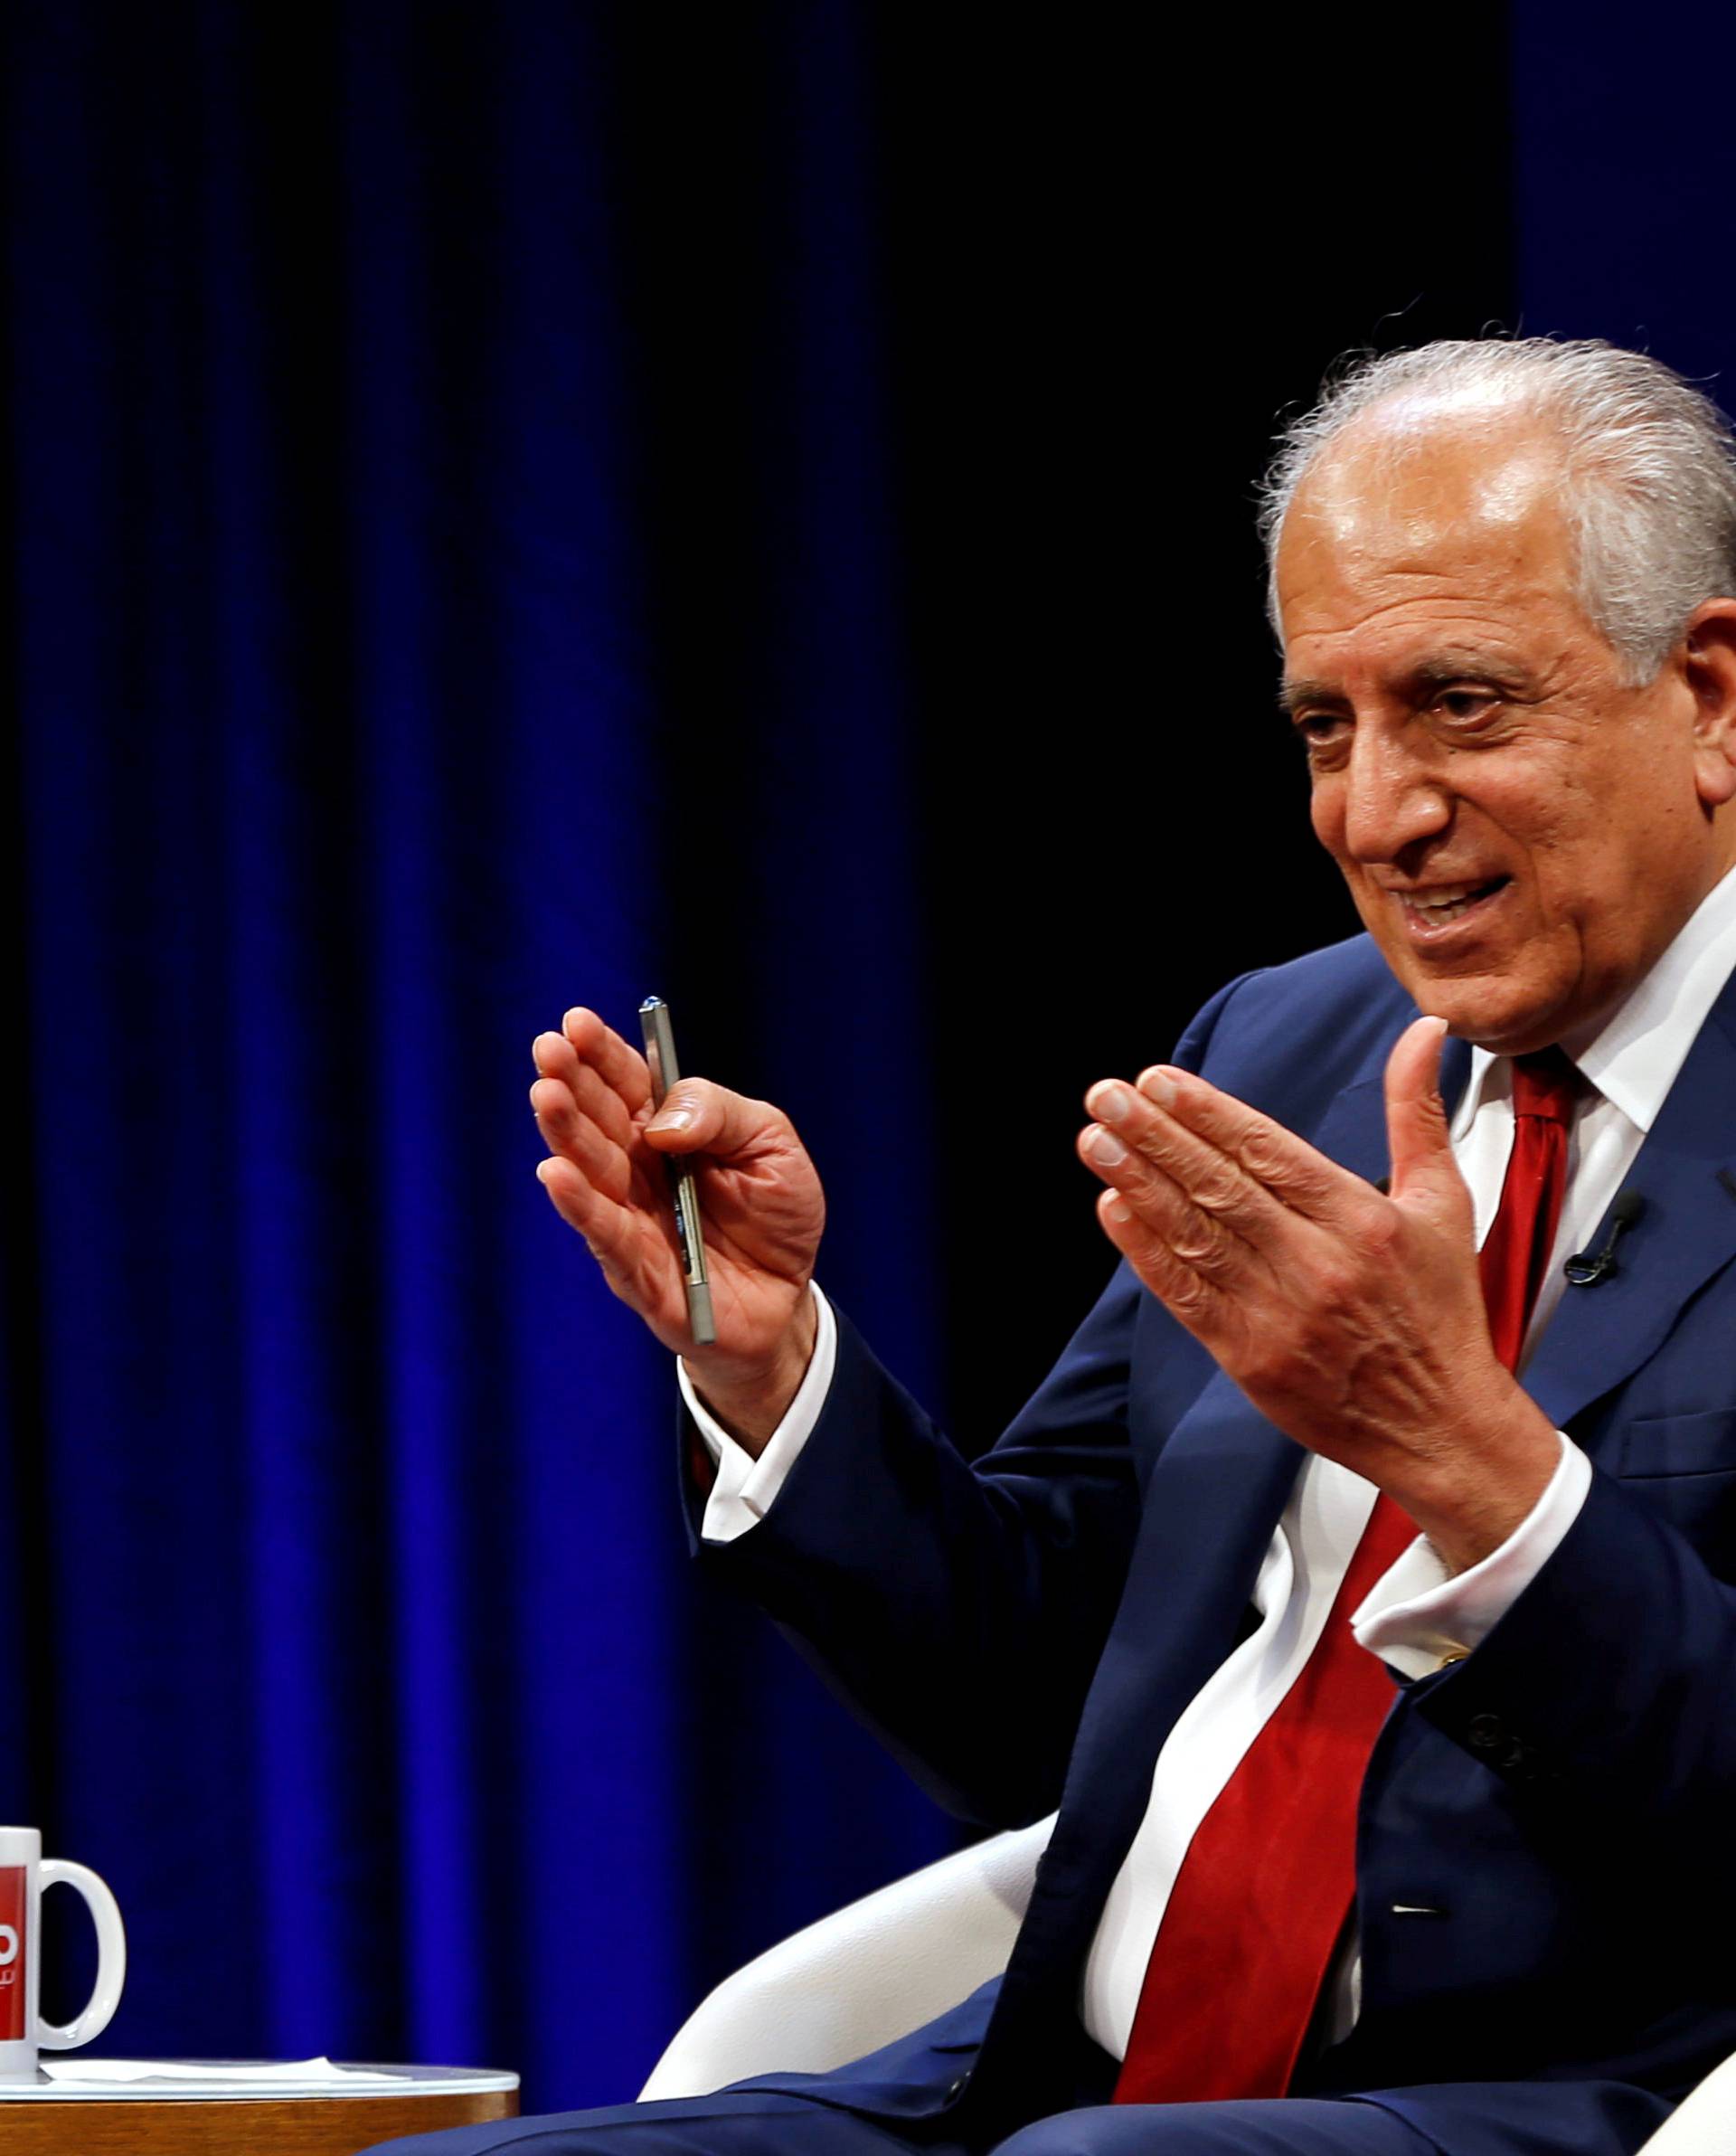 FILE PHOTO: U.S. envoy for peace in Afghanistan Zalmay Khalilzad speaks during a debate at Tolo TV channel in Kabul